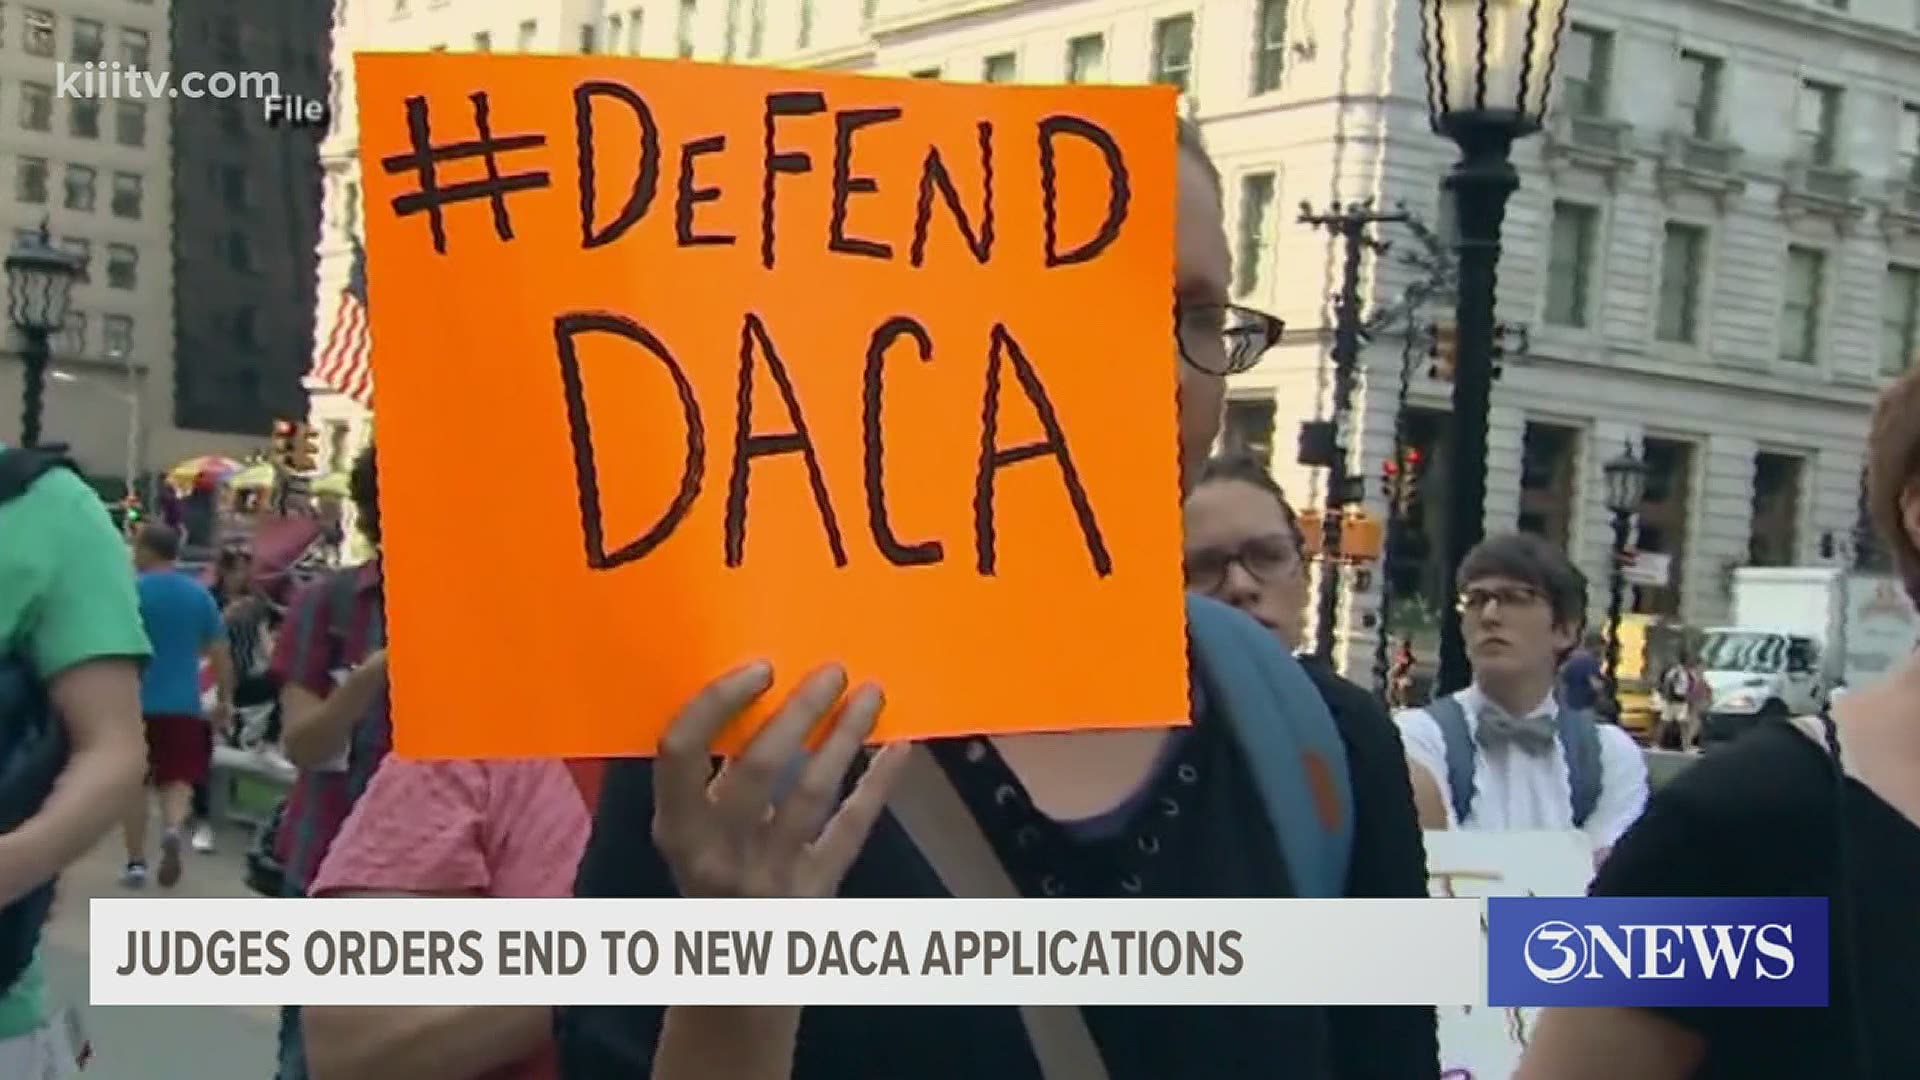 A Texas judge has ordered the federal government to stop granting new DACA applications.